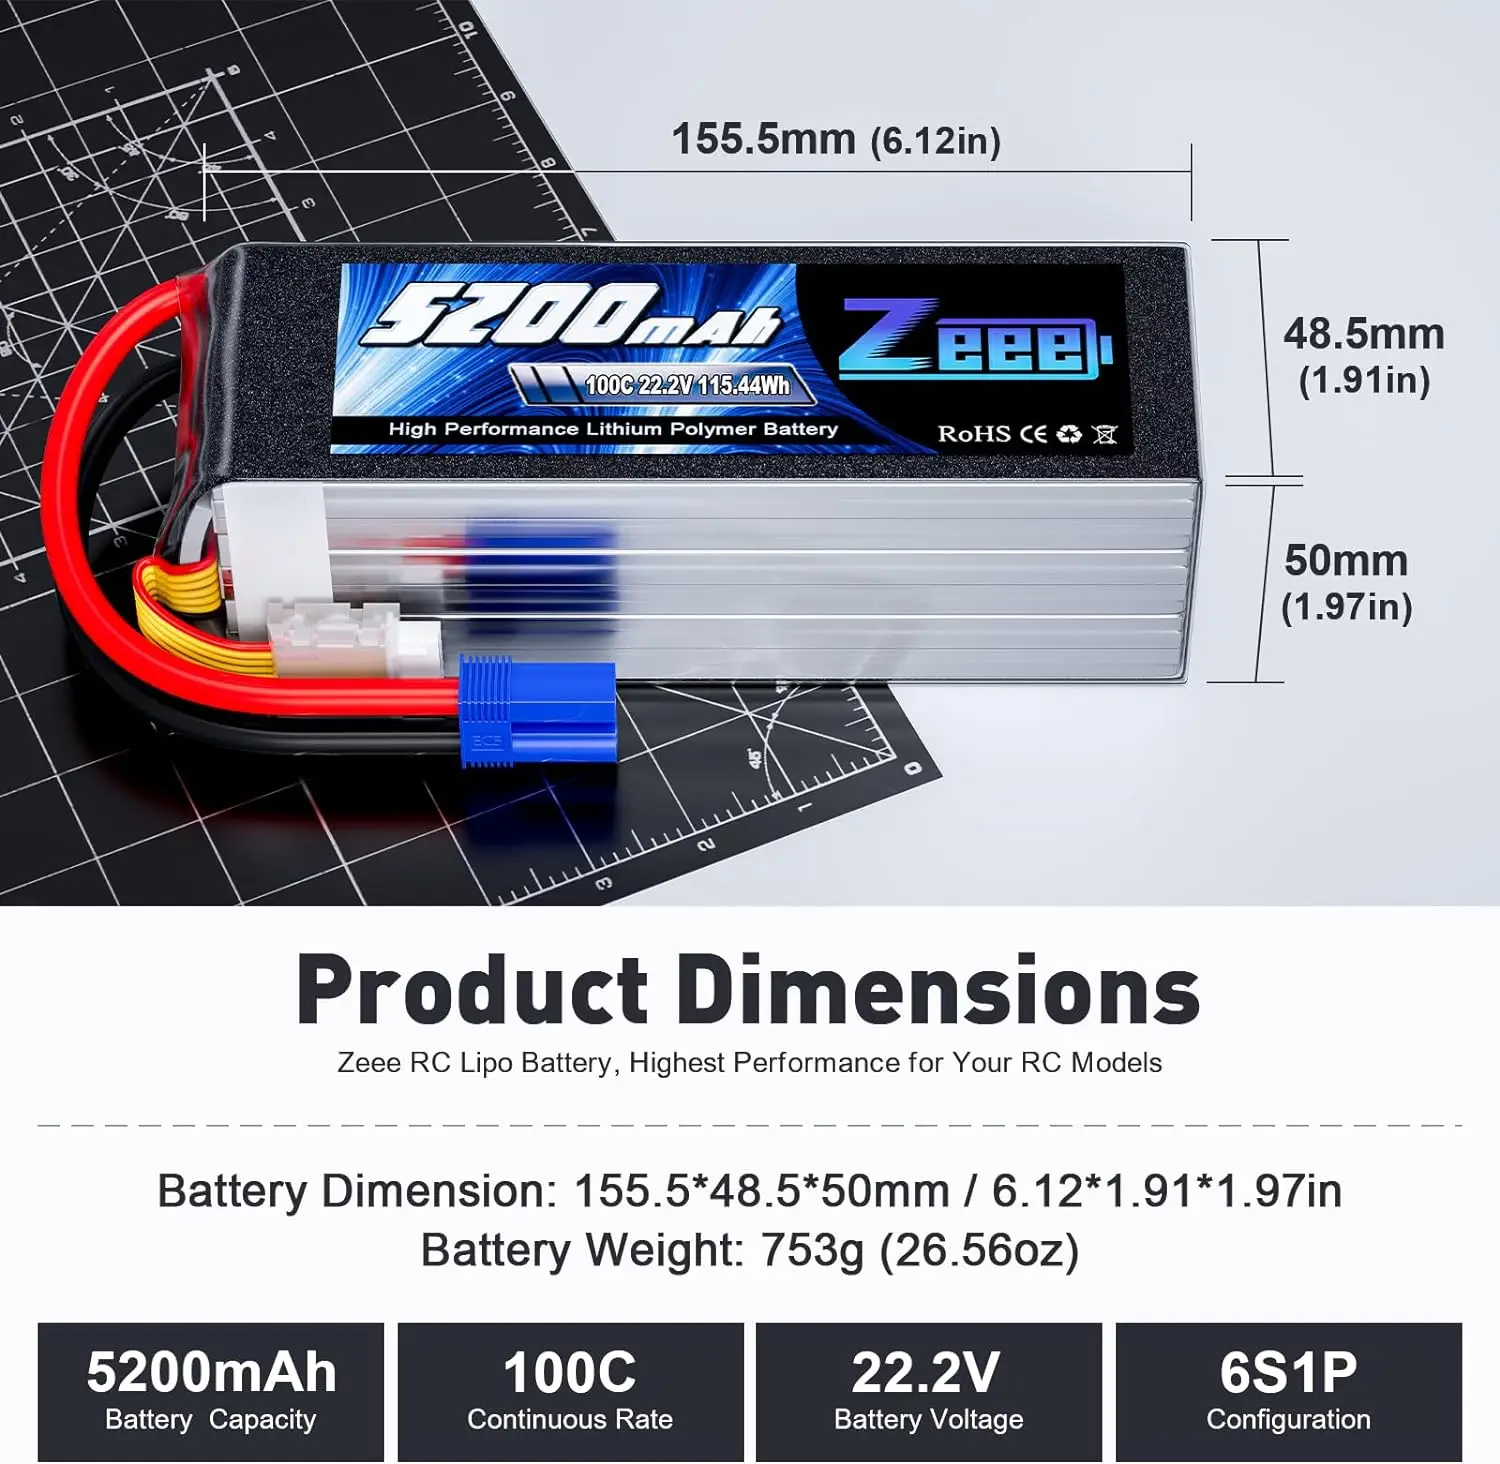 Zeee 6S 6500mAh 7500mAh Lipo FPV Drone Battery 22.2V 100C 6000 with XT60 Plug Softcase for RC Helicopter Airplane RC Model Parts